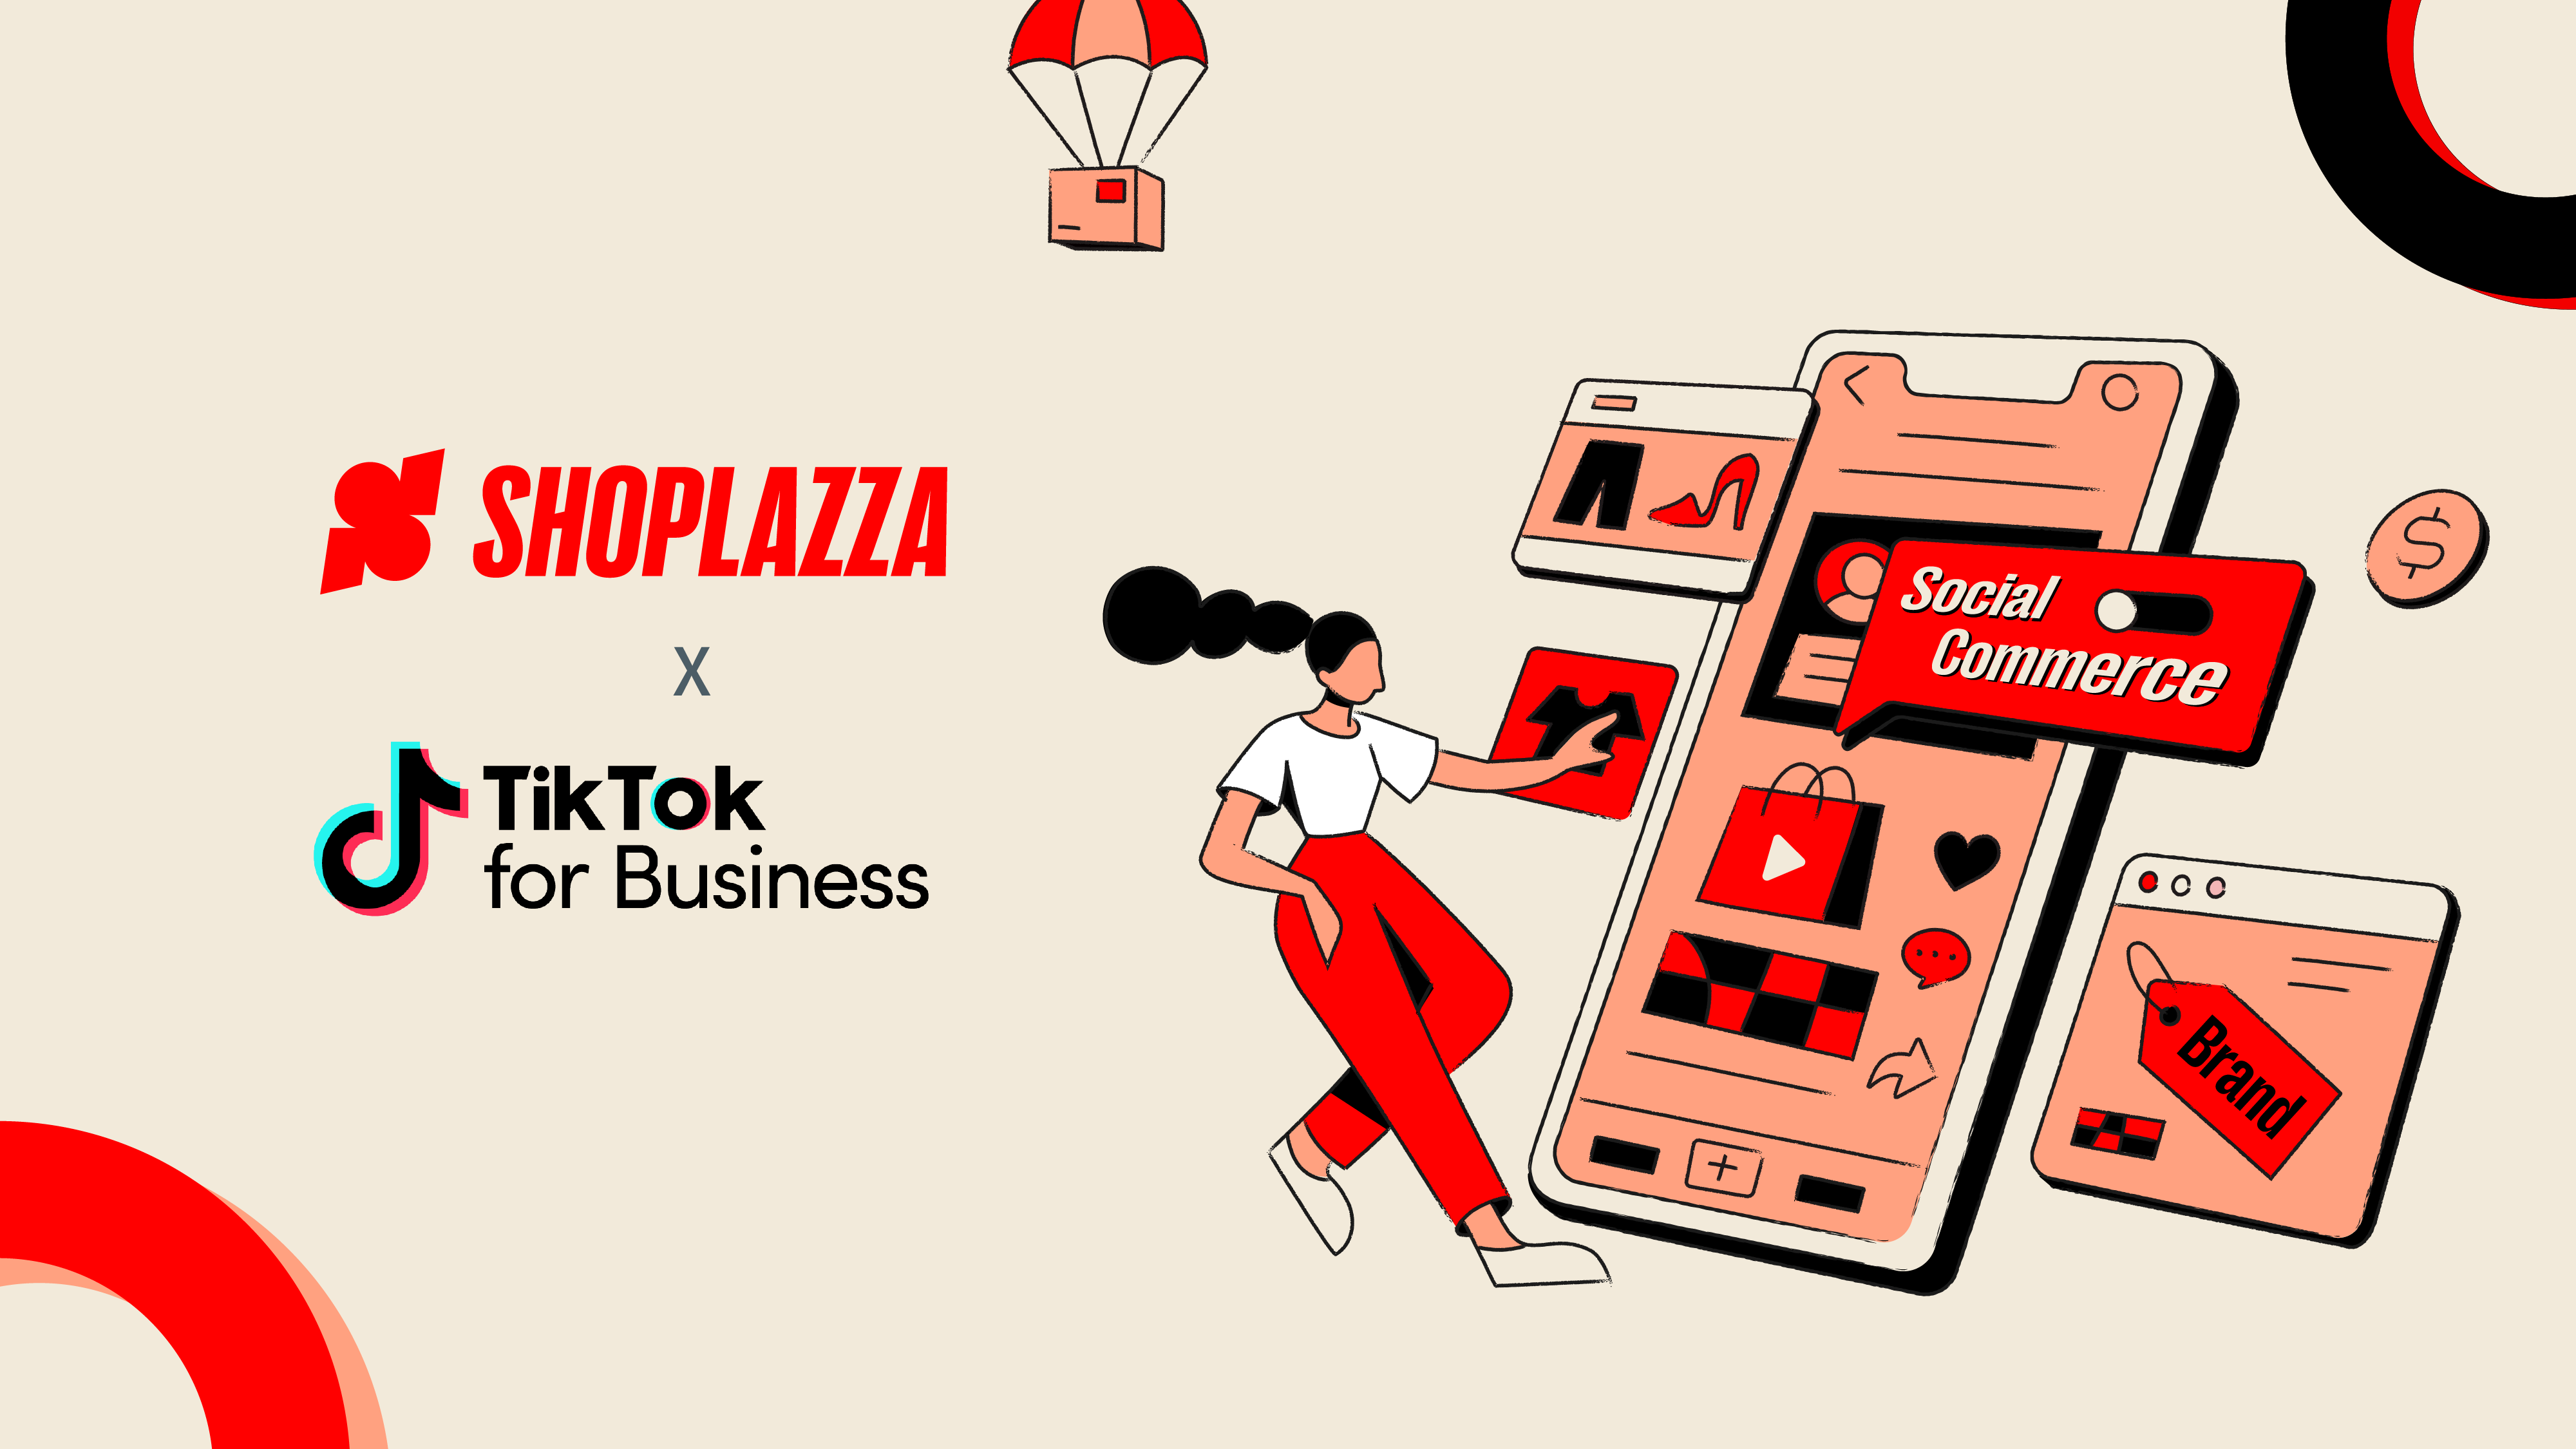 Cover image shows Shoplazza's and TikTok For Business' logos, next to an illustration of a woman standing near an oversized smartphone, where the words 